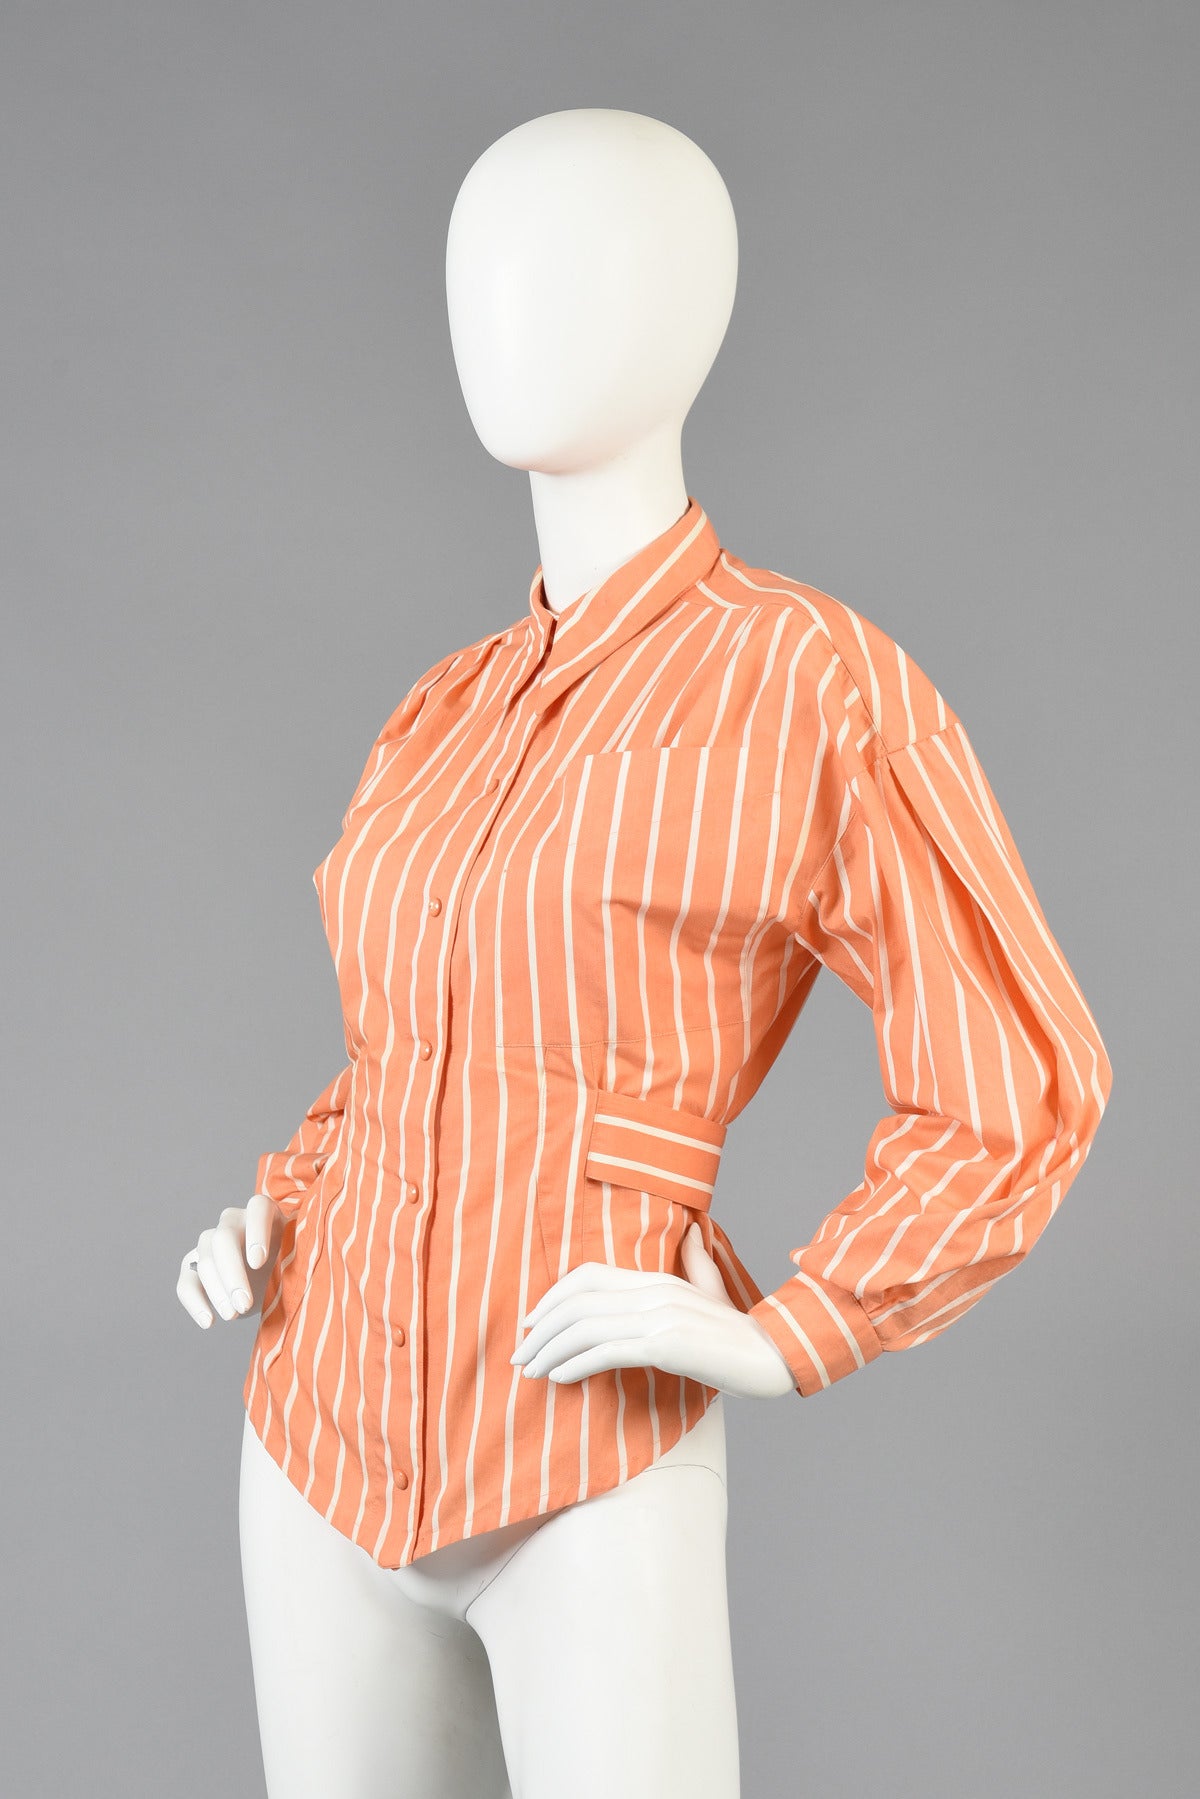 Thierry Mugler 1980s Avant Garde Cutout Back Blouse In Excellent Condition For Sale In Yucca Valley, CA